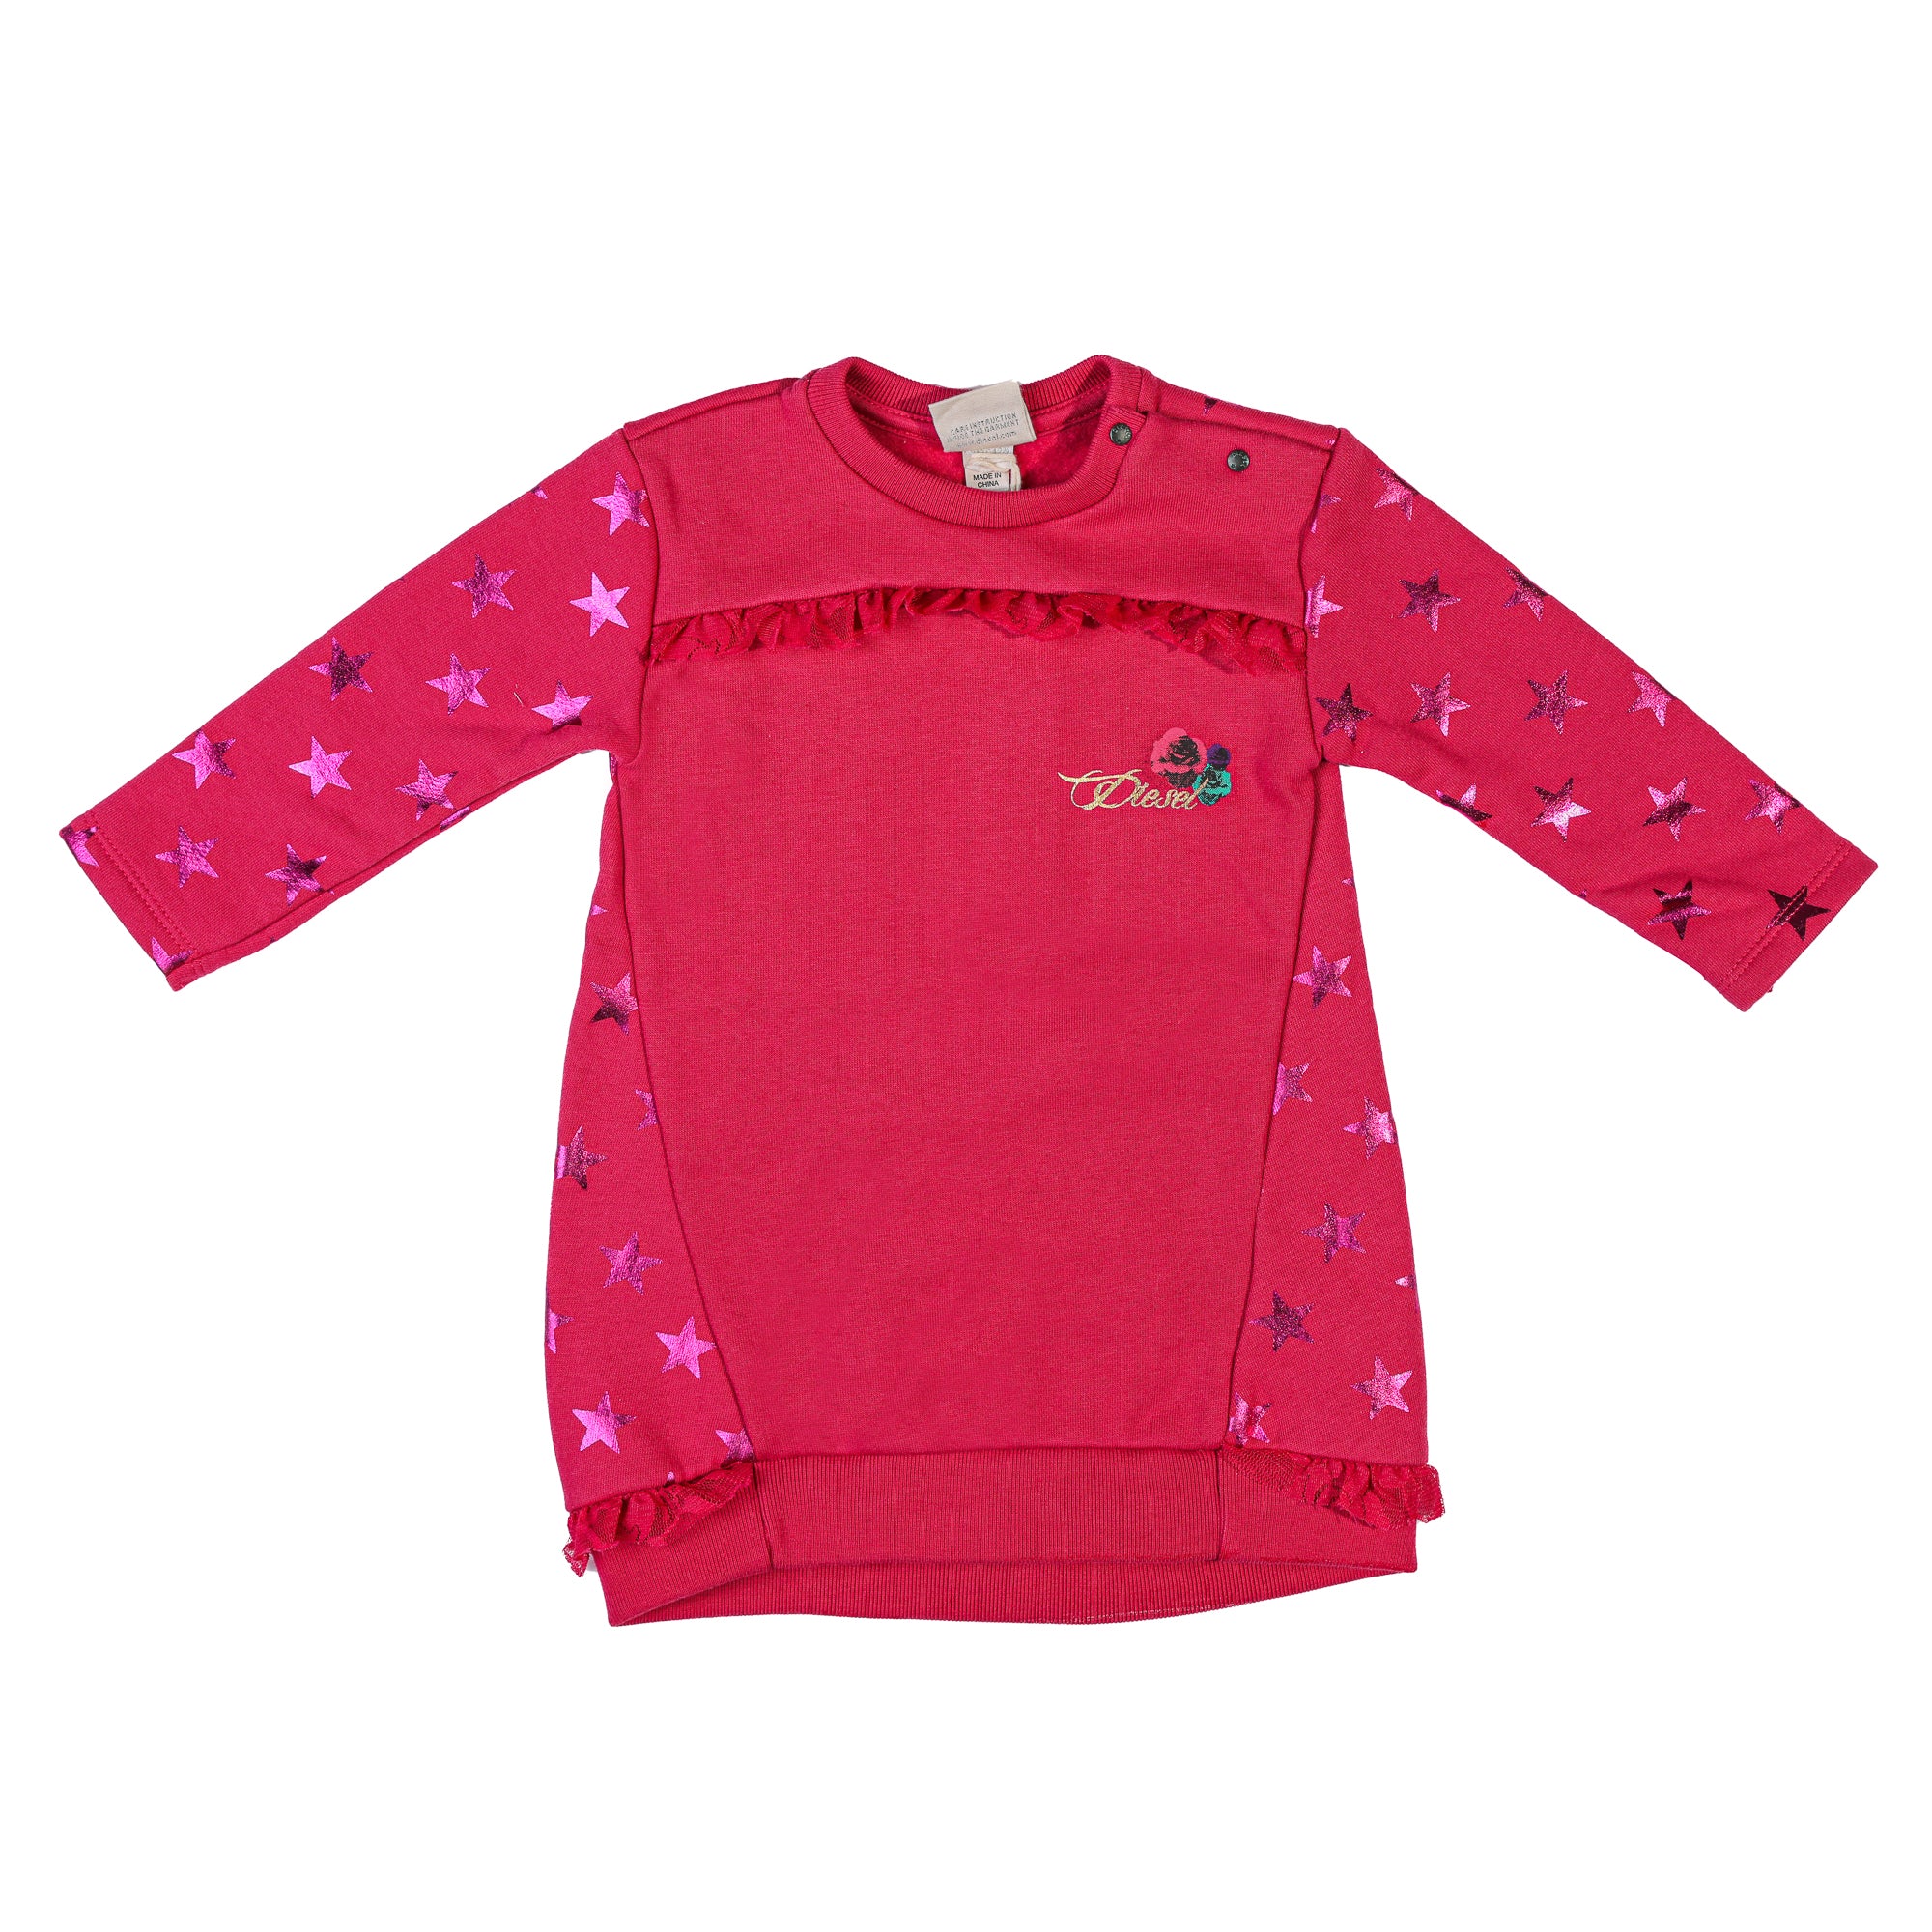 Diesel baby girl cotton sweater dress with fleece, ruffles on the front and botton with stars